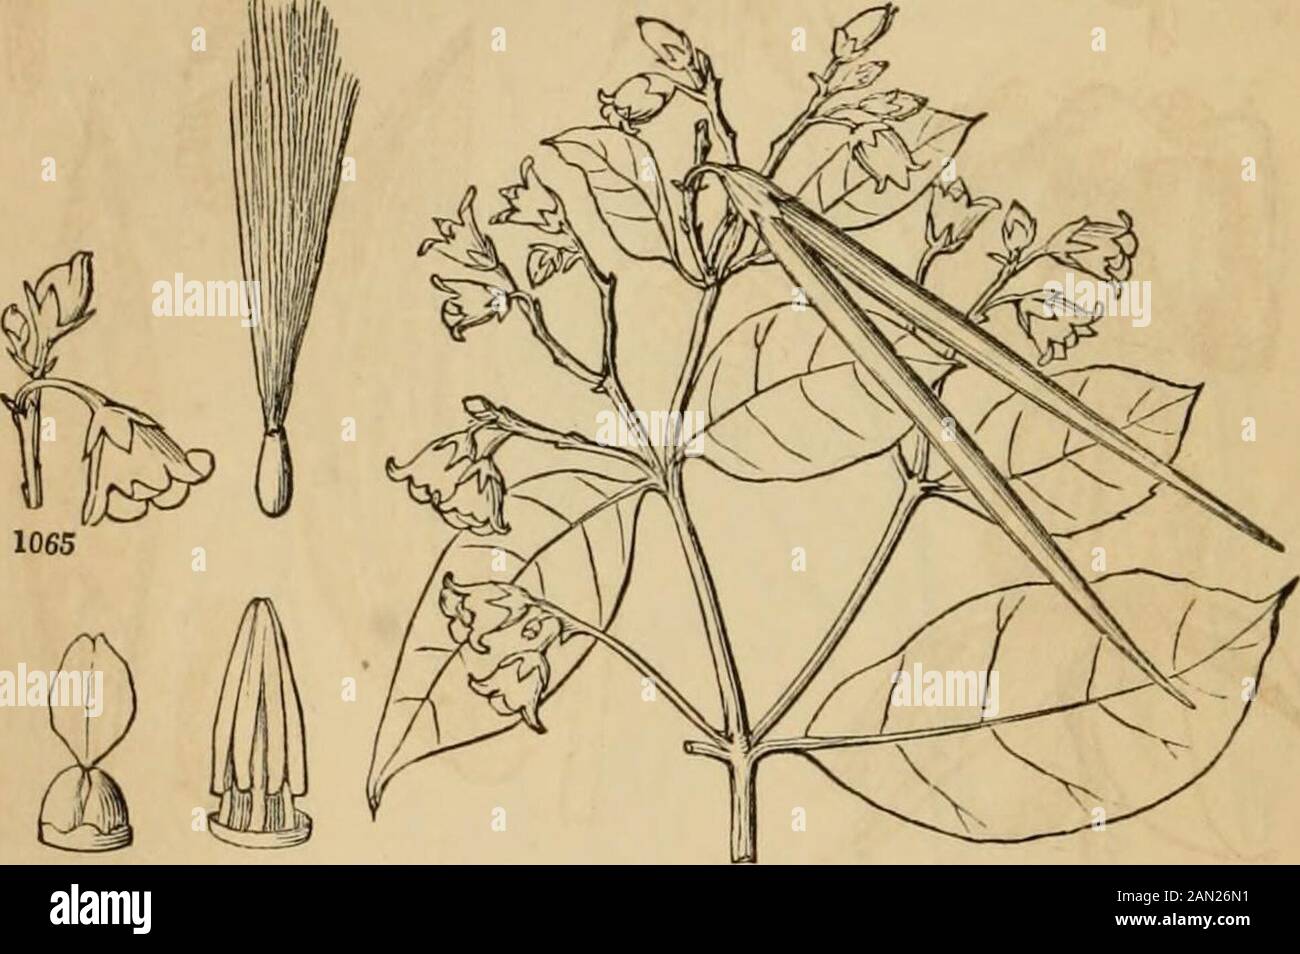 Introduction to structural and systematic botany, and vegetable physiology, : being a 5th and revedof the Botanical text-book, illustrated with over thirteen hundred woodcuts . Dogbane), Vinca FIG. 1056. Flower of Gentiana angustifolia 1057. Corolla, and 1058, the calyx, laid open.1059. The pistil. 1060. Cross-section of the pistil, showing the parietal attachment of theovules. 1061. Fiipe capsule of G. saponaria, raised on a stipe: the persistent witheringcorolla, &c torn away. 1062. A magnified seed, with its large and loose testa. 1063. Leaf ofLimnanthemuin lacunosum, bearing the flowers on Stock Photo